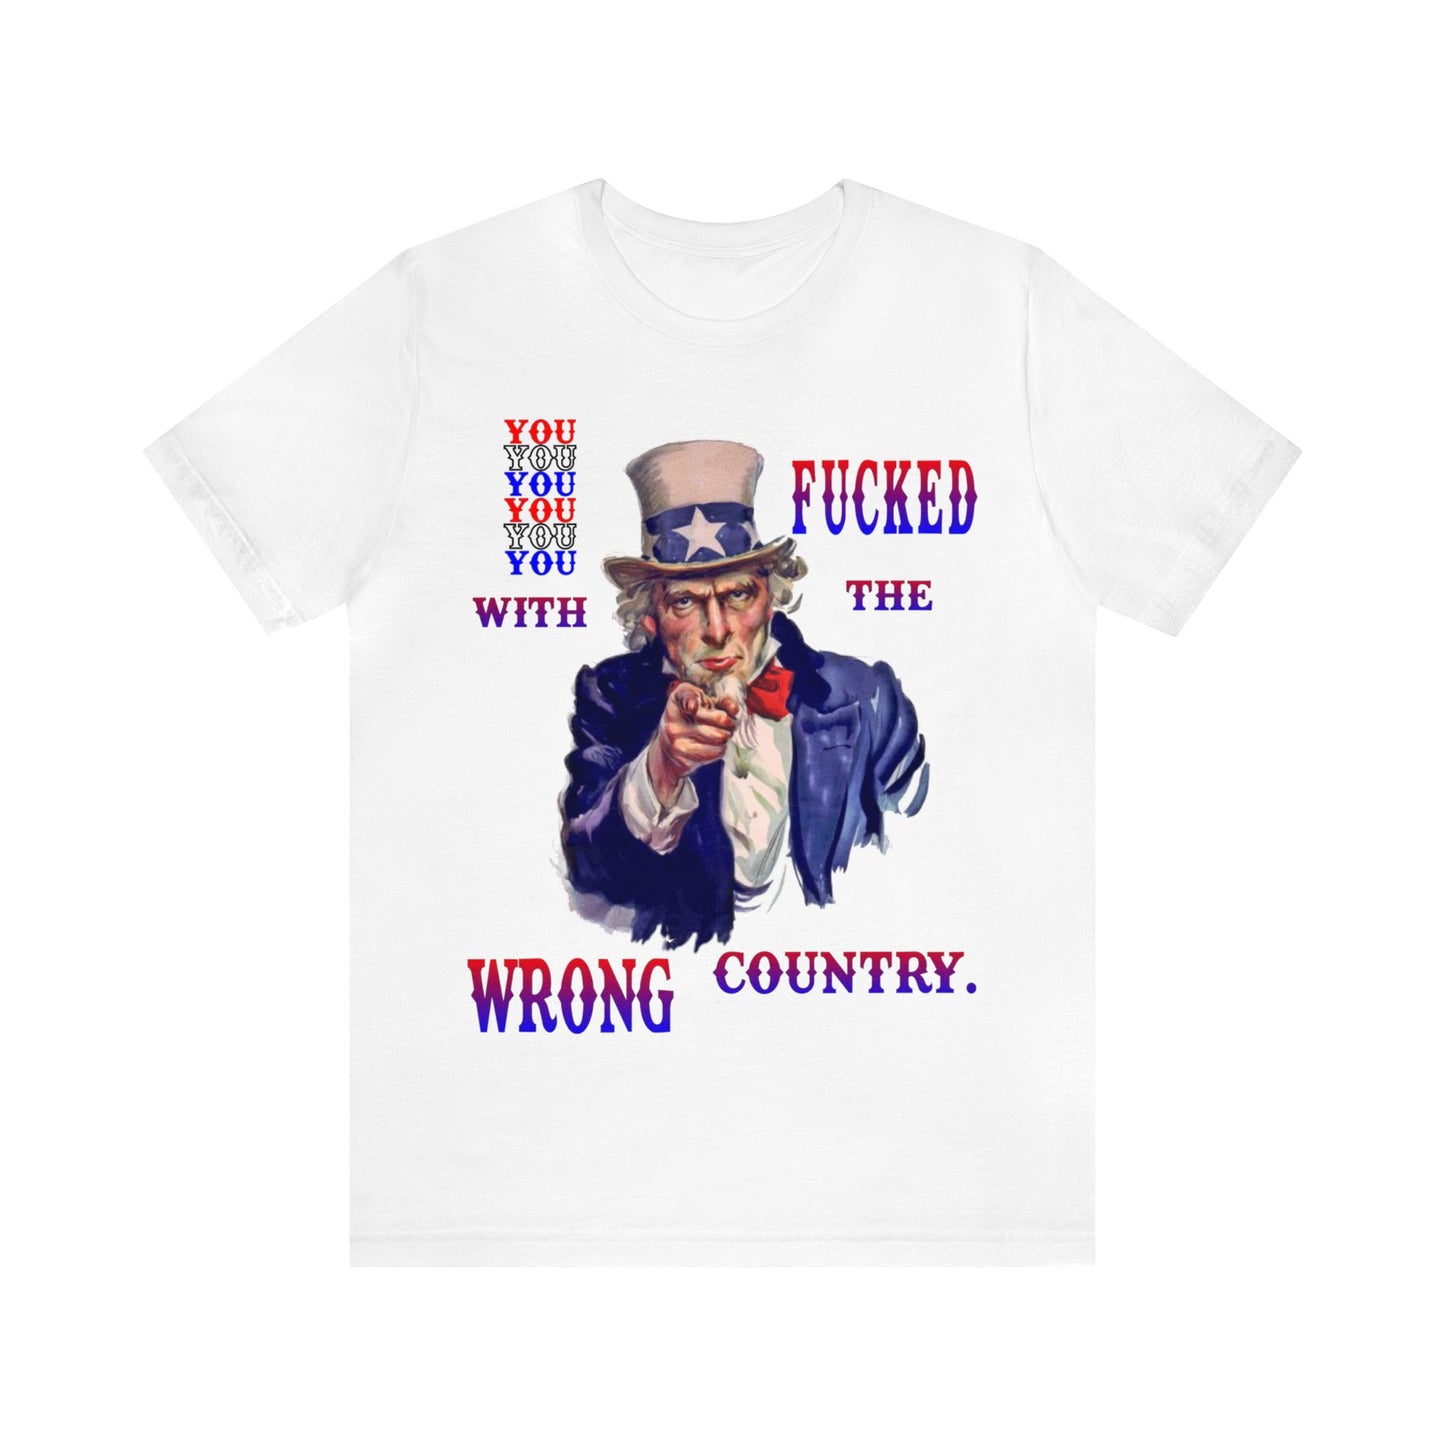 You Fucked with the wrong country. - Hurts Shirts Collection